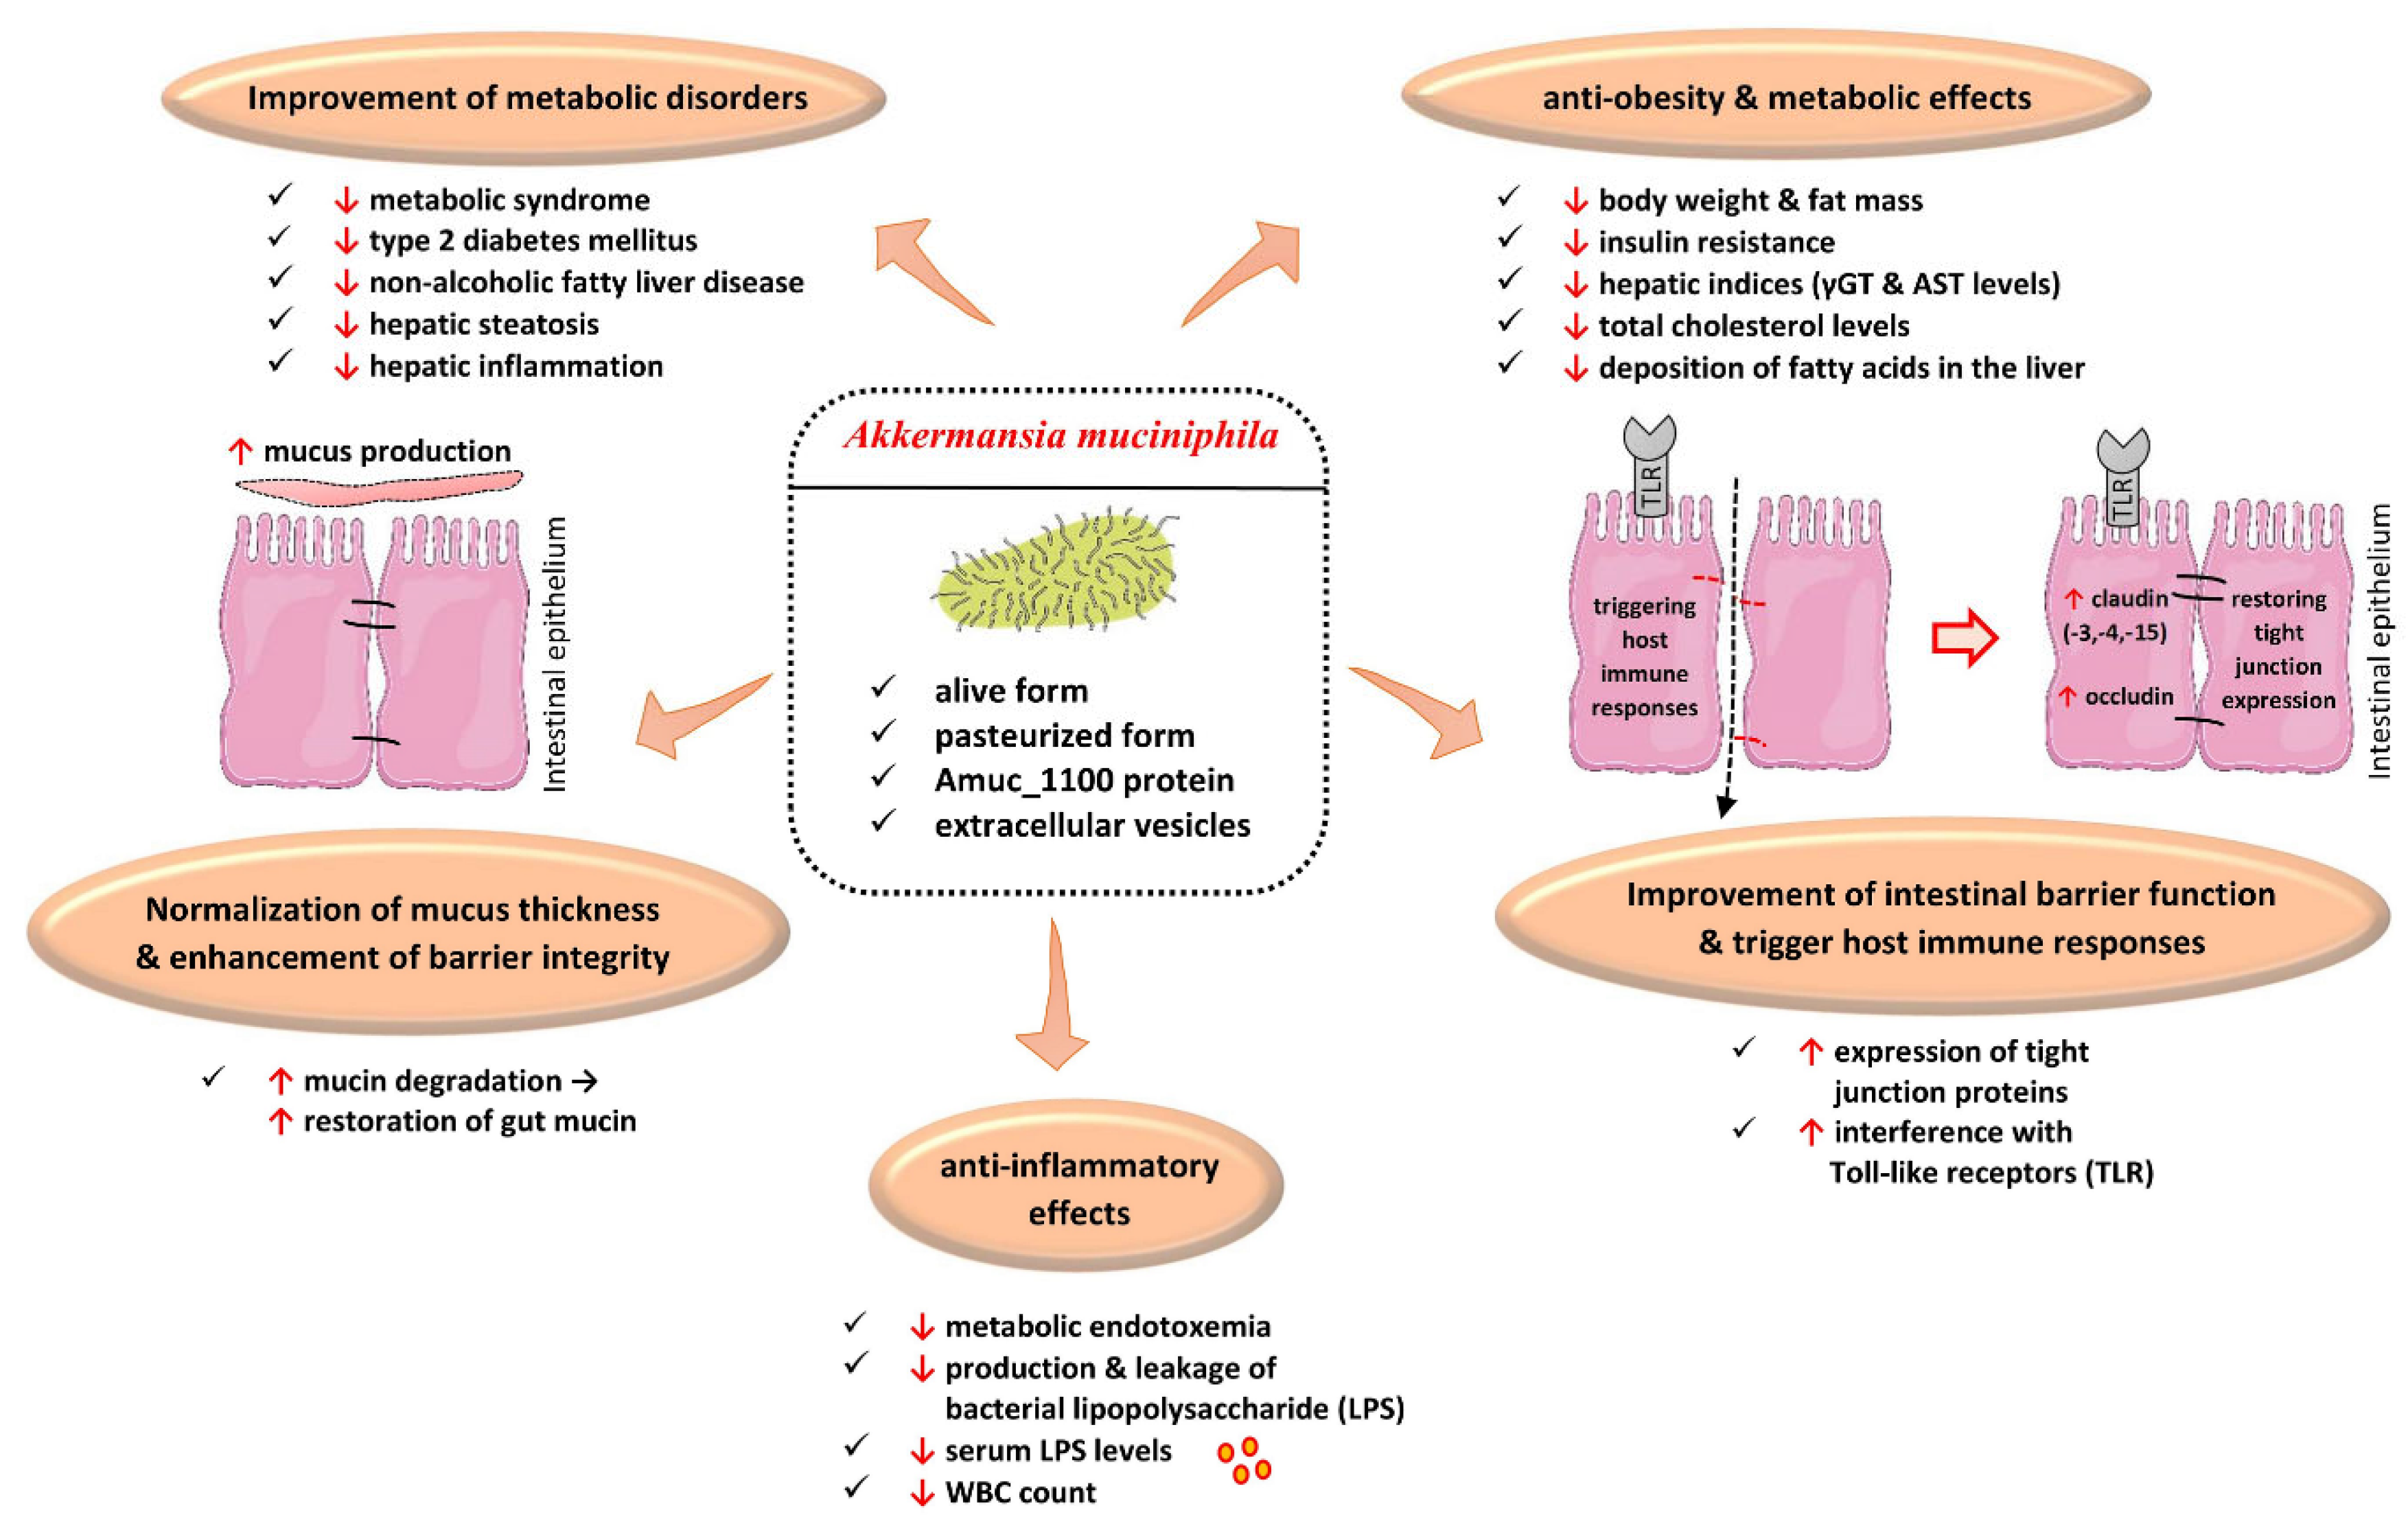 Synergy and oxygen adaptation for development of next-generation probiotics